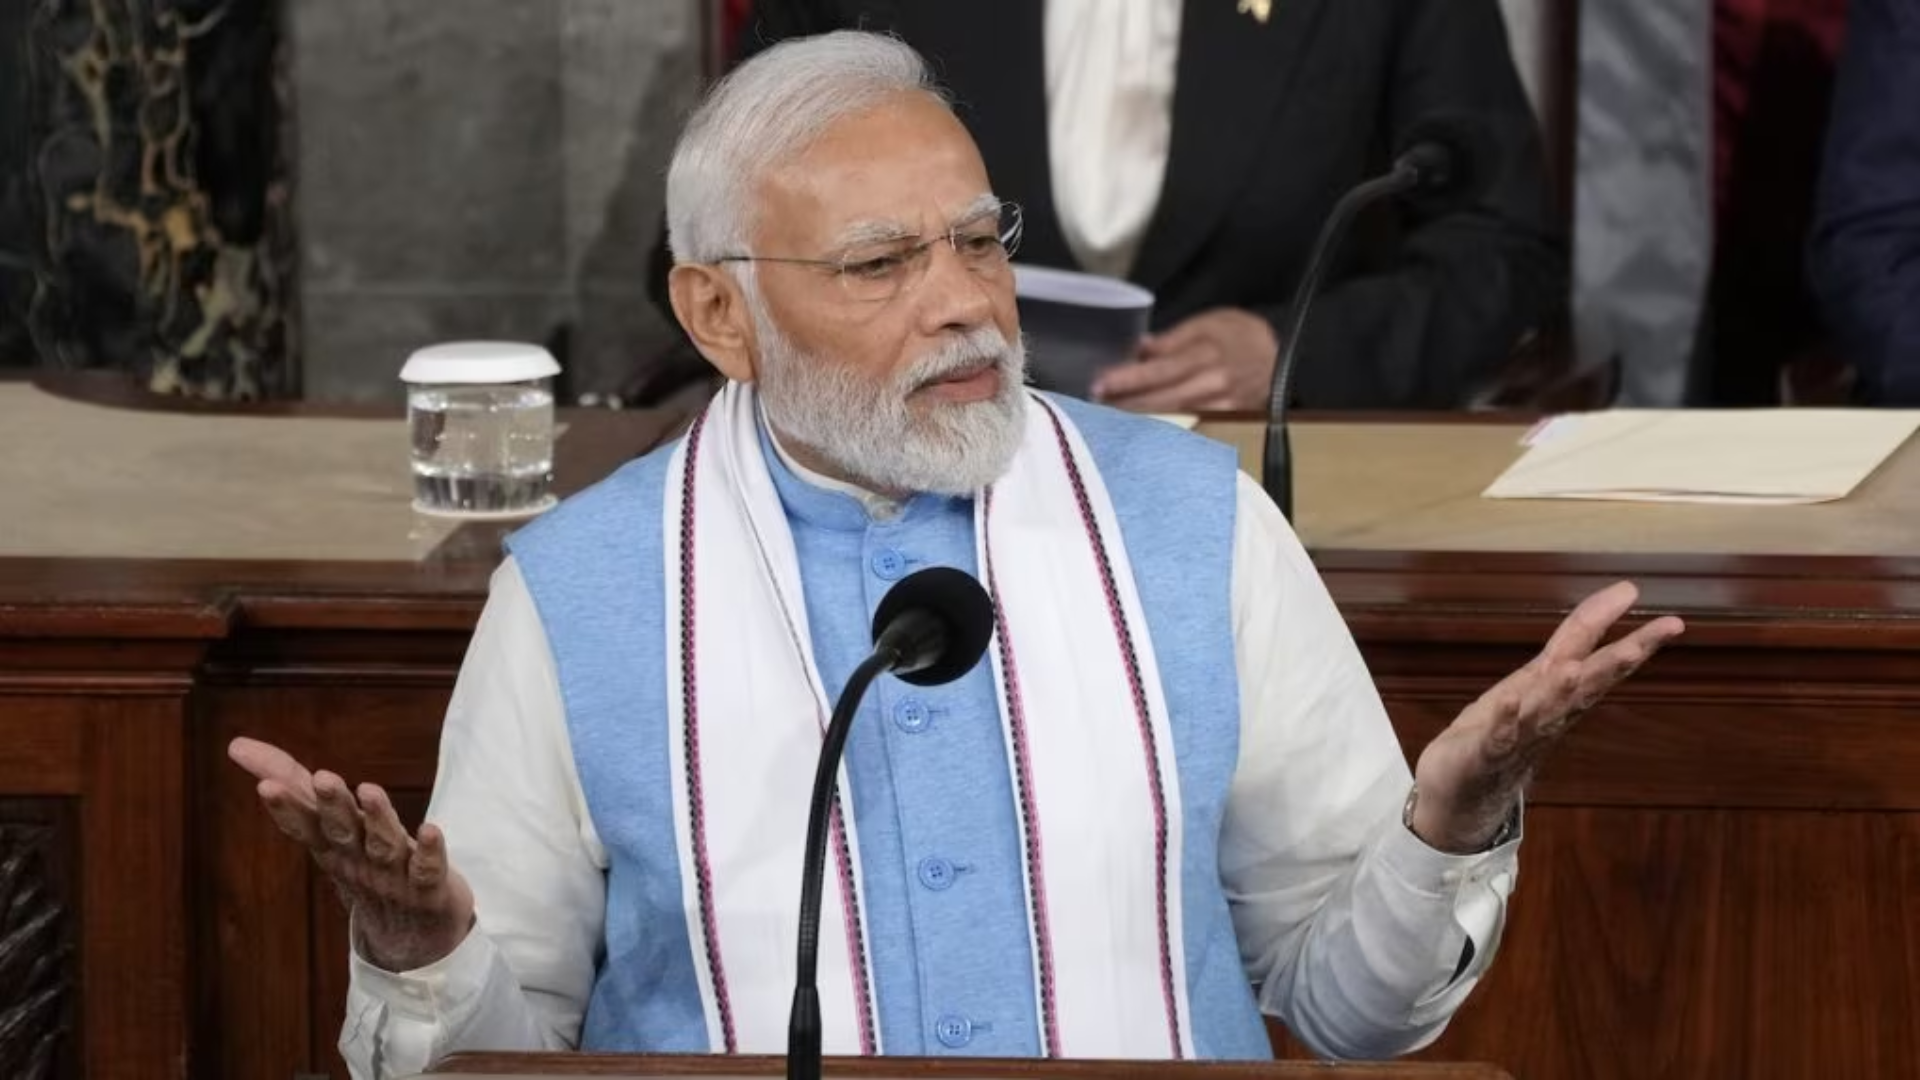 PM Modi: “Congress is corrupt, India failed to thrive under its rule”